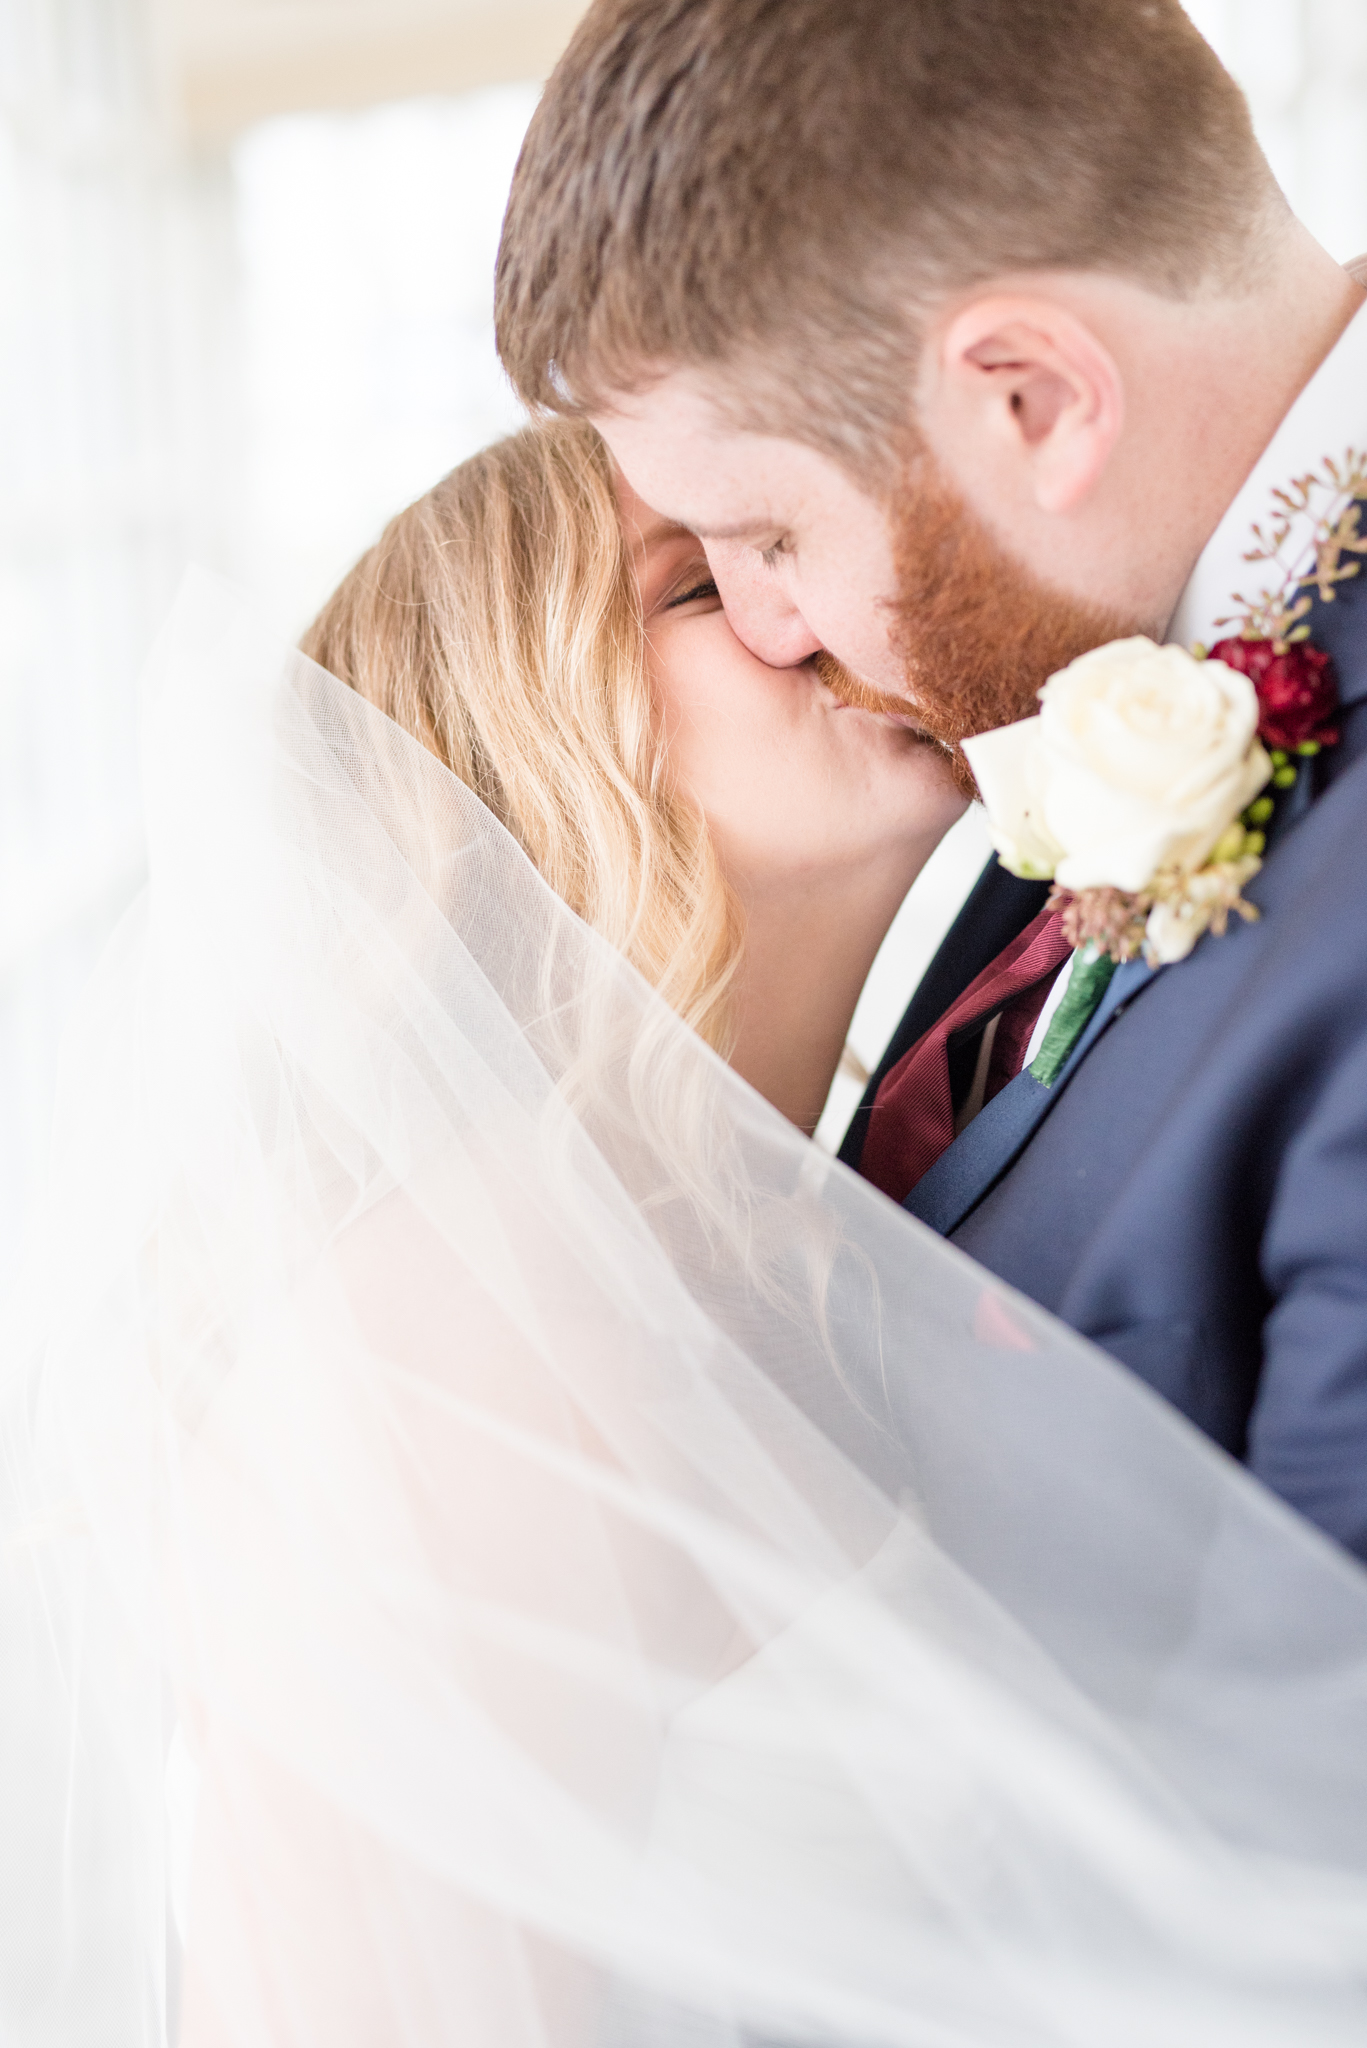 Bride and groom kiss with veil blowing.